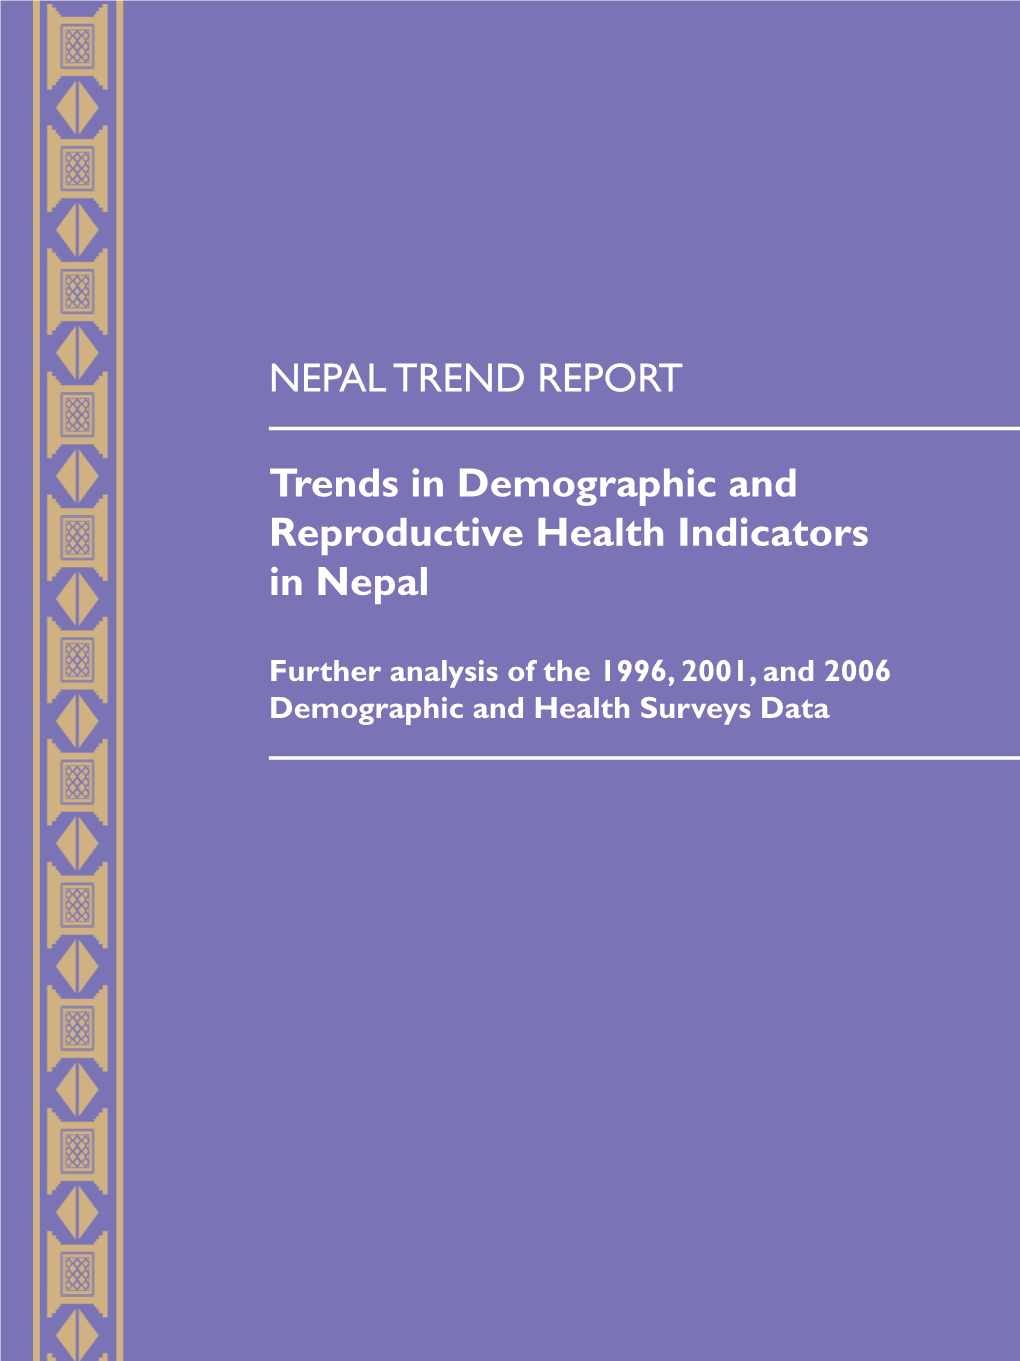 NEPAL TREND REPORT Trends in Demographic and Reproductive